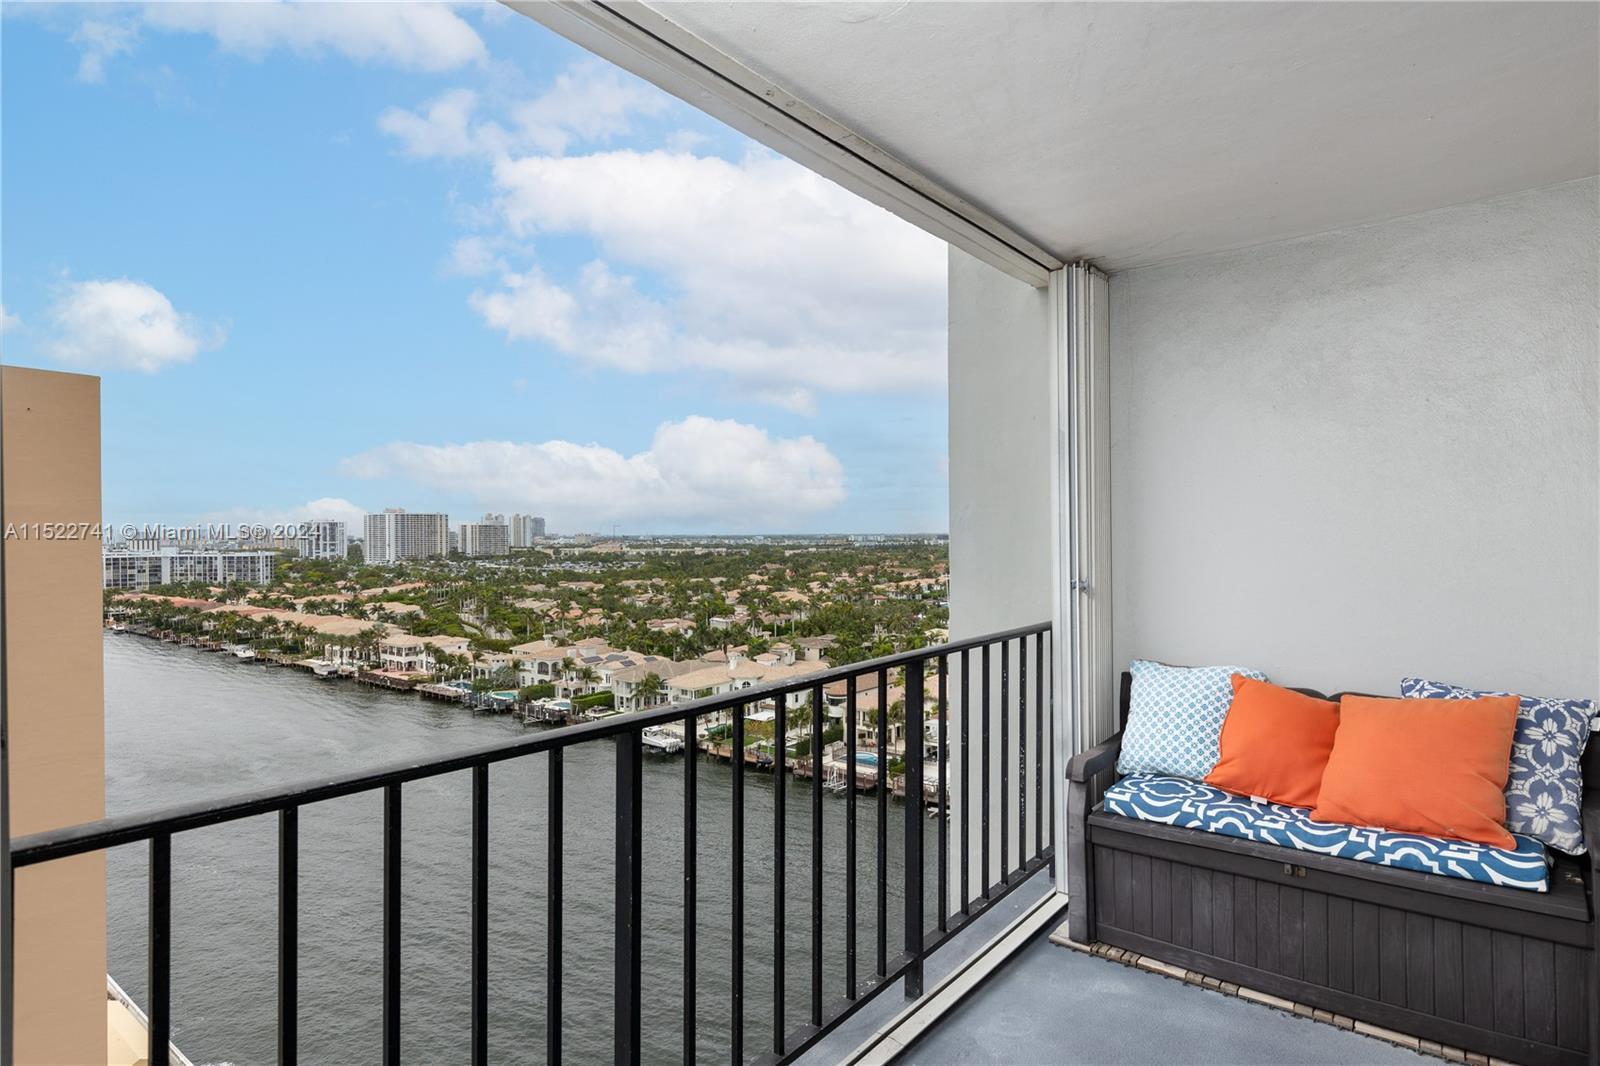 Welcome to your coastal oasis! This beautiful renovated 1-bedroom, 1.5-bath condo offers a perfect b